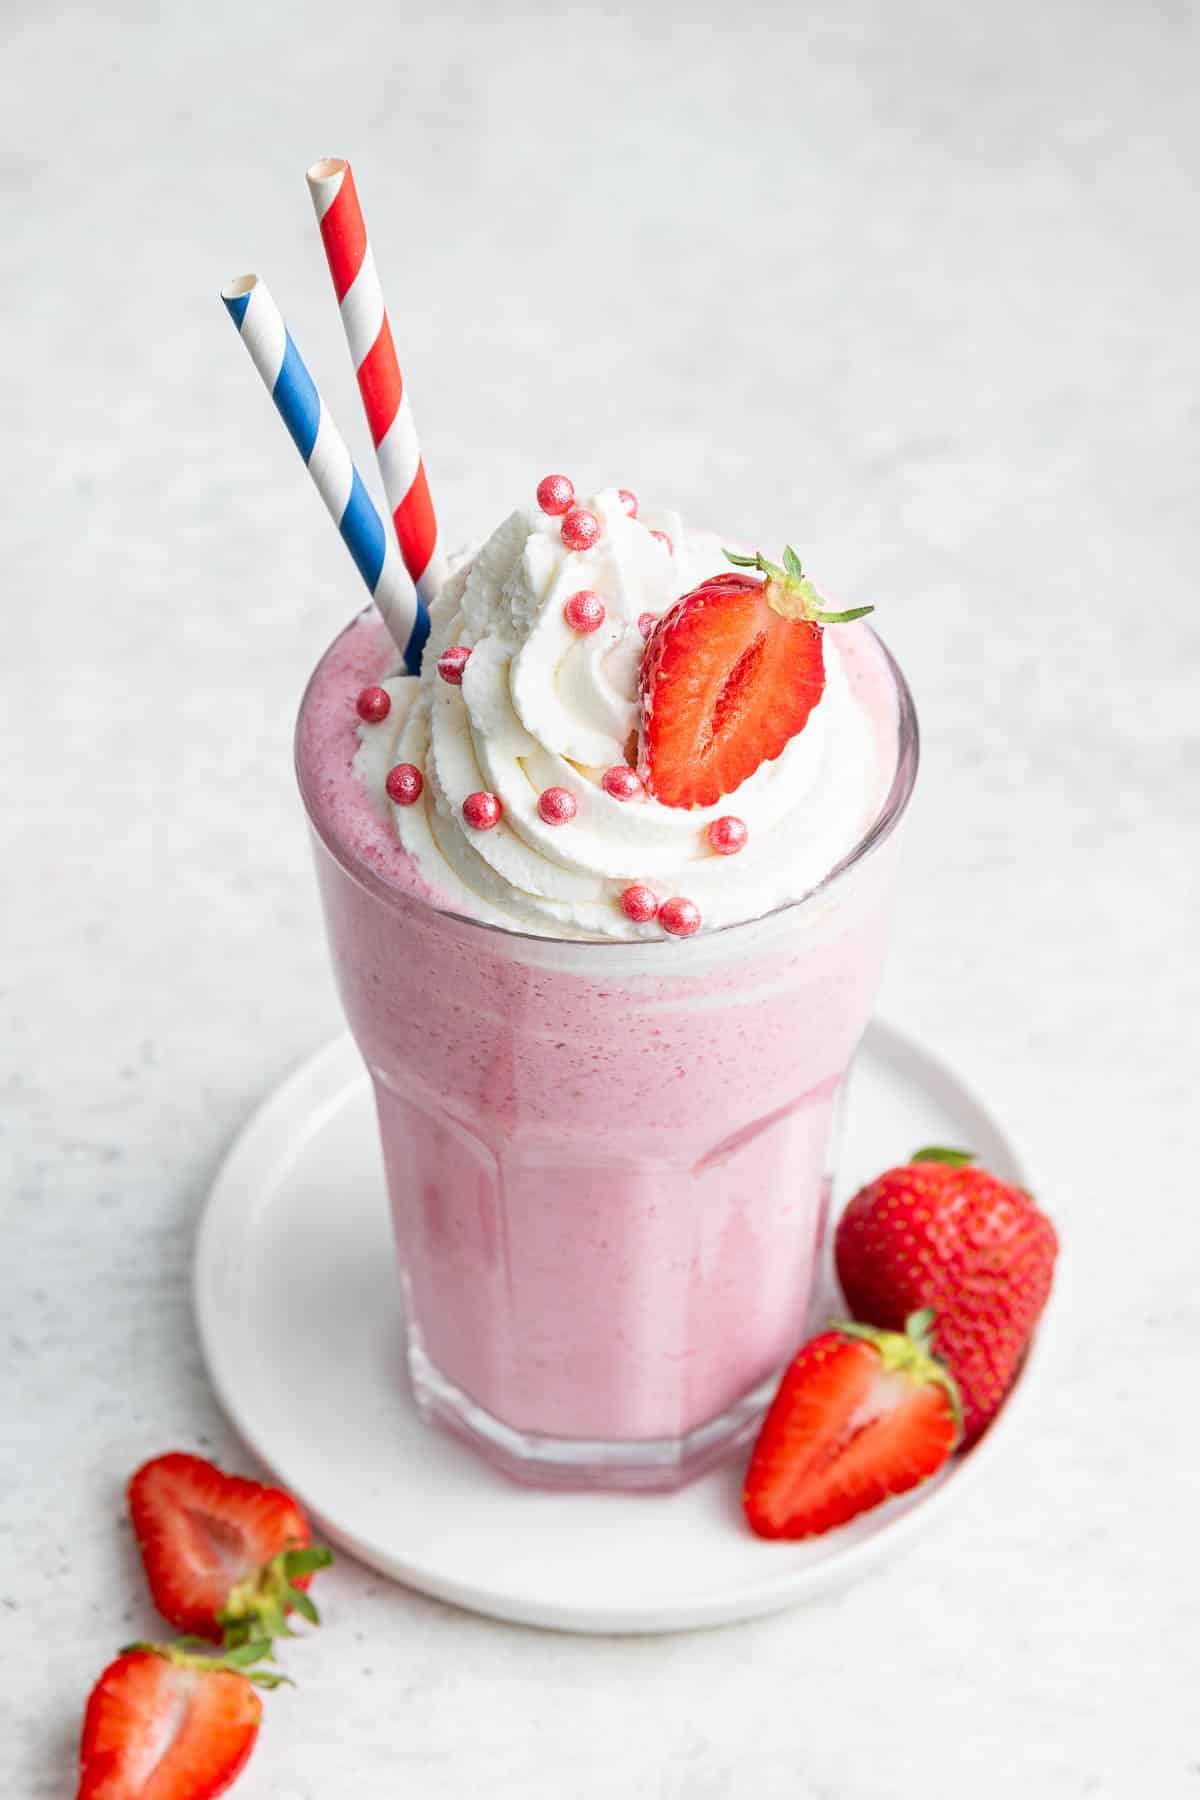 how to make an ice cream smoothie at home